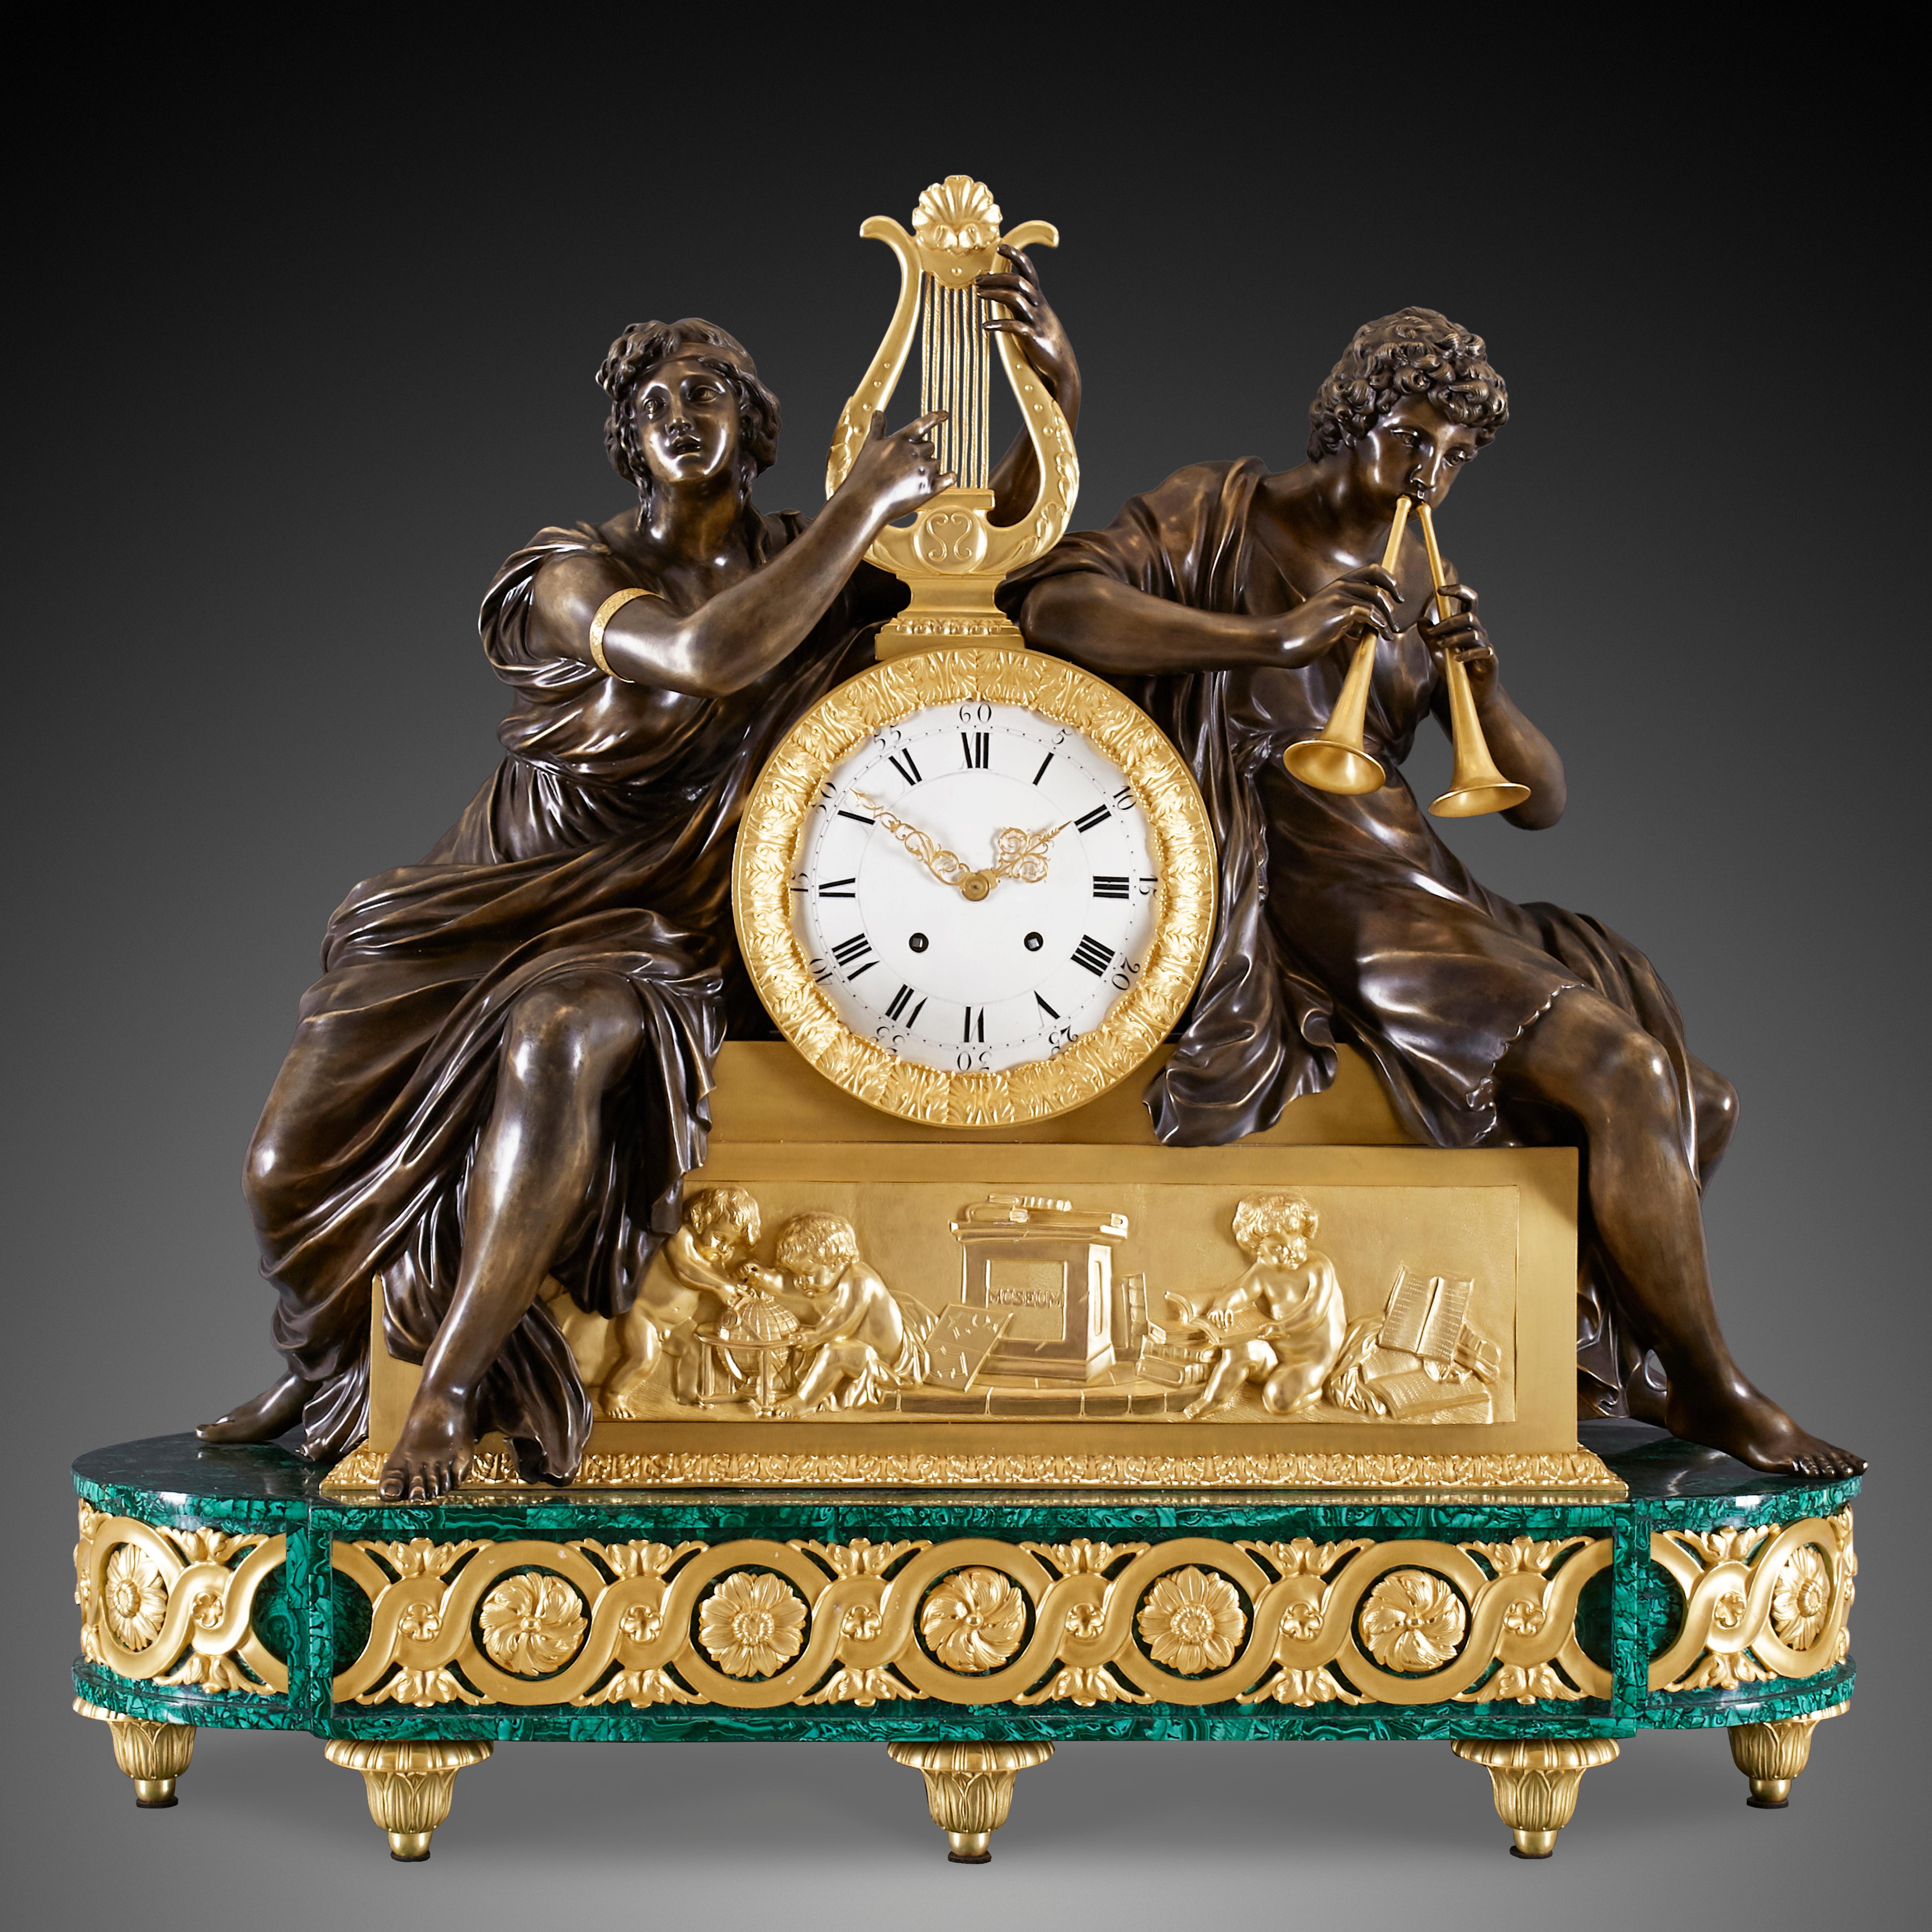 This antique clock set consists of two important pieces which are the mantel clock and the decorative garnitures. The set derives from the Louis Philippe I and Charles X period and is crafted in the characteristic Restoration style of that time. In